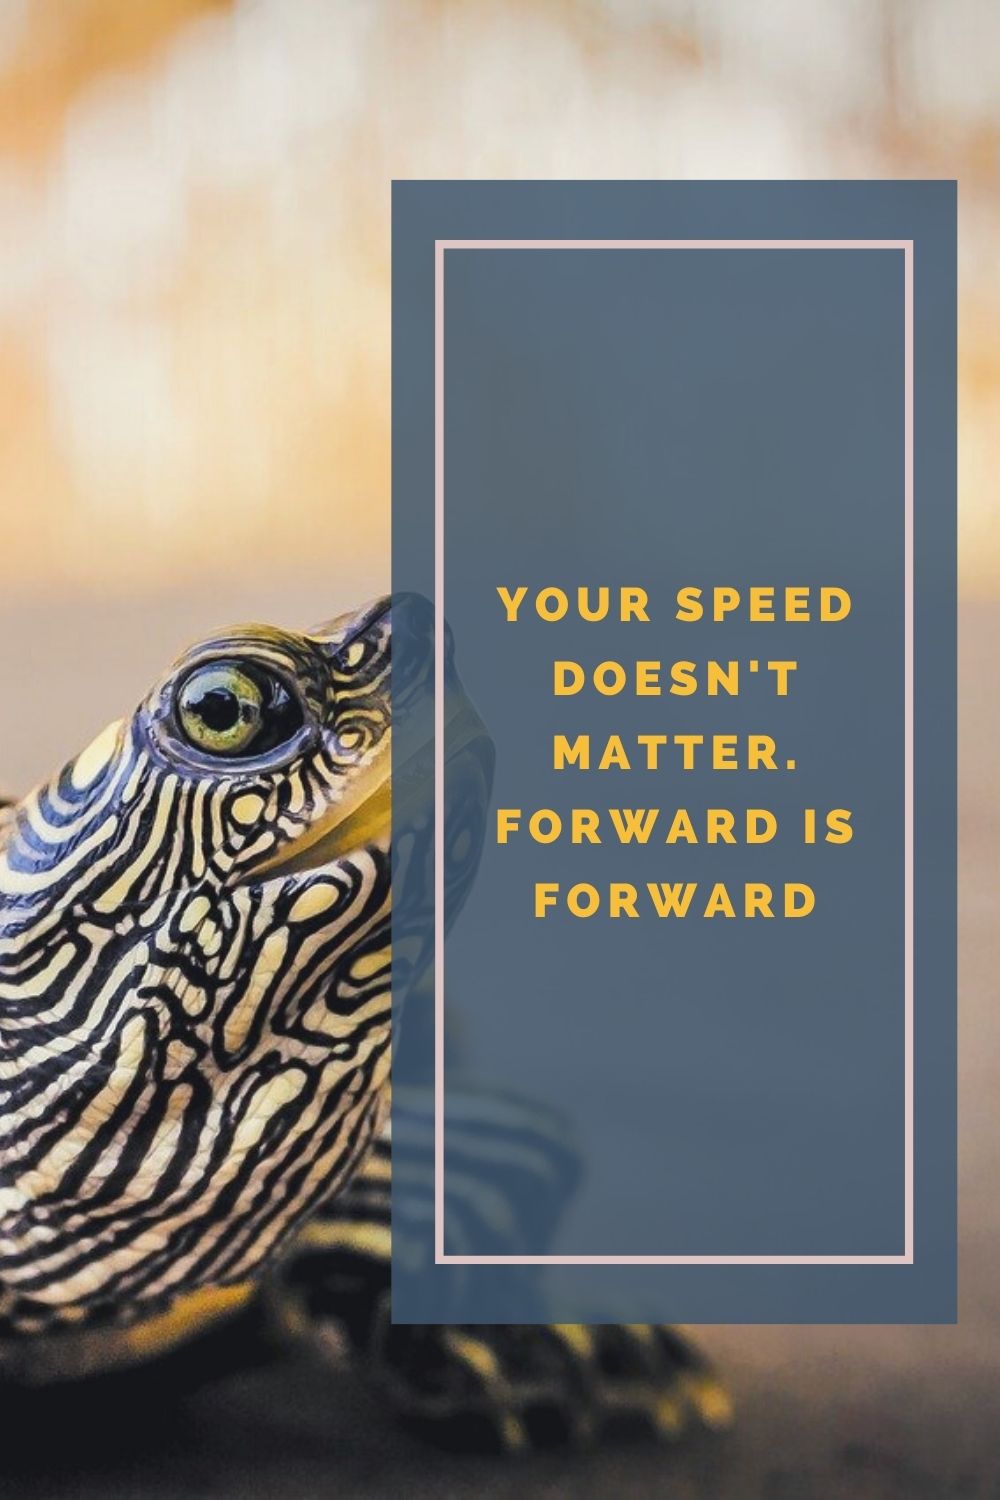 Your speed doesn't matter. Forward is forward